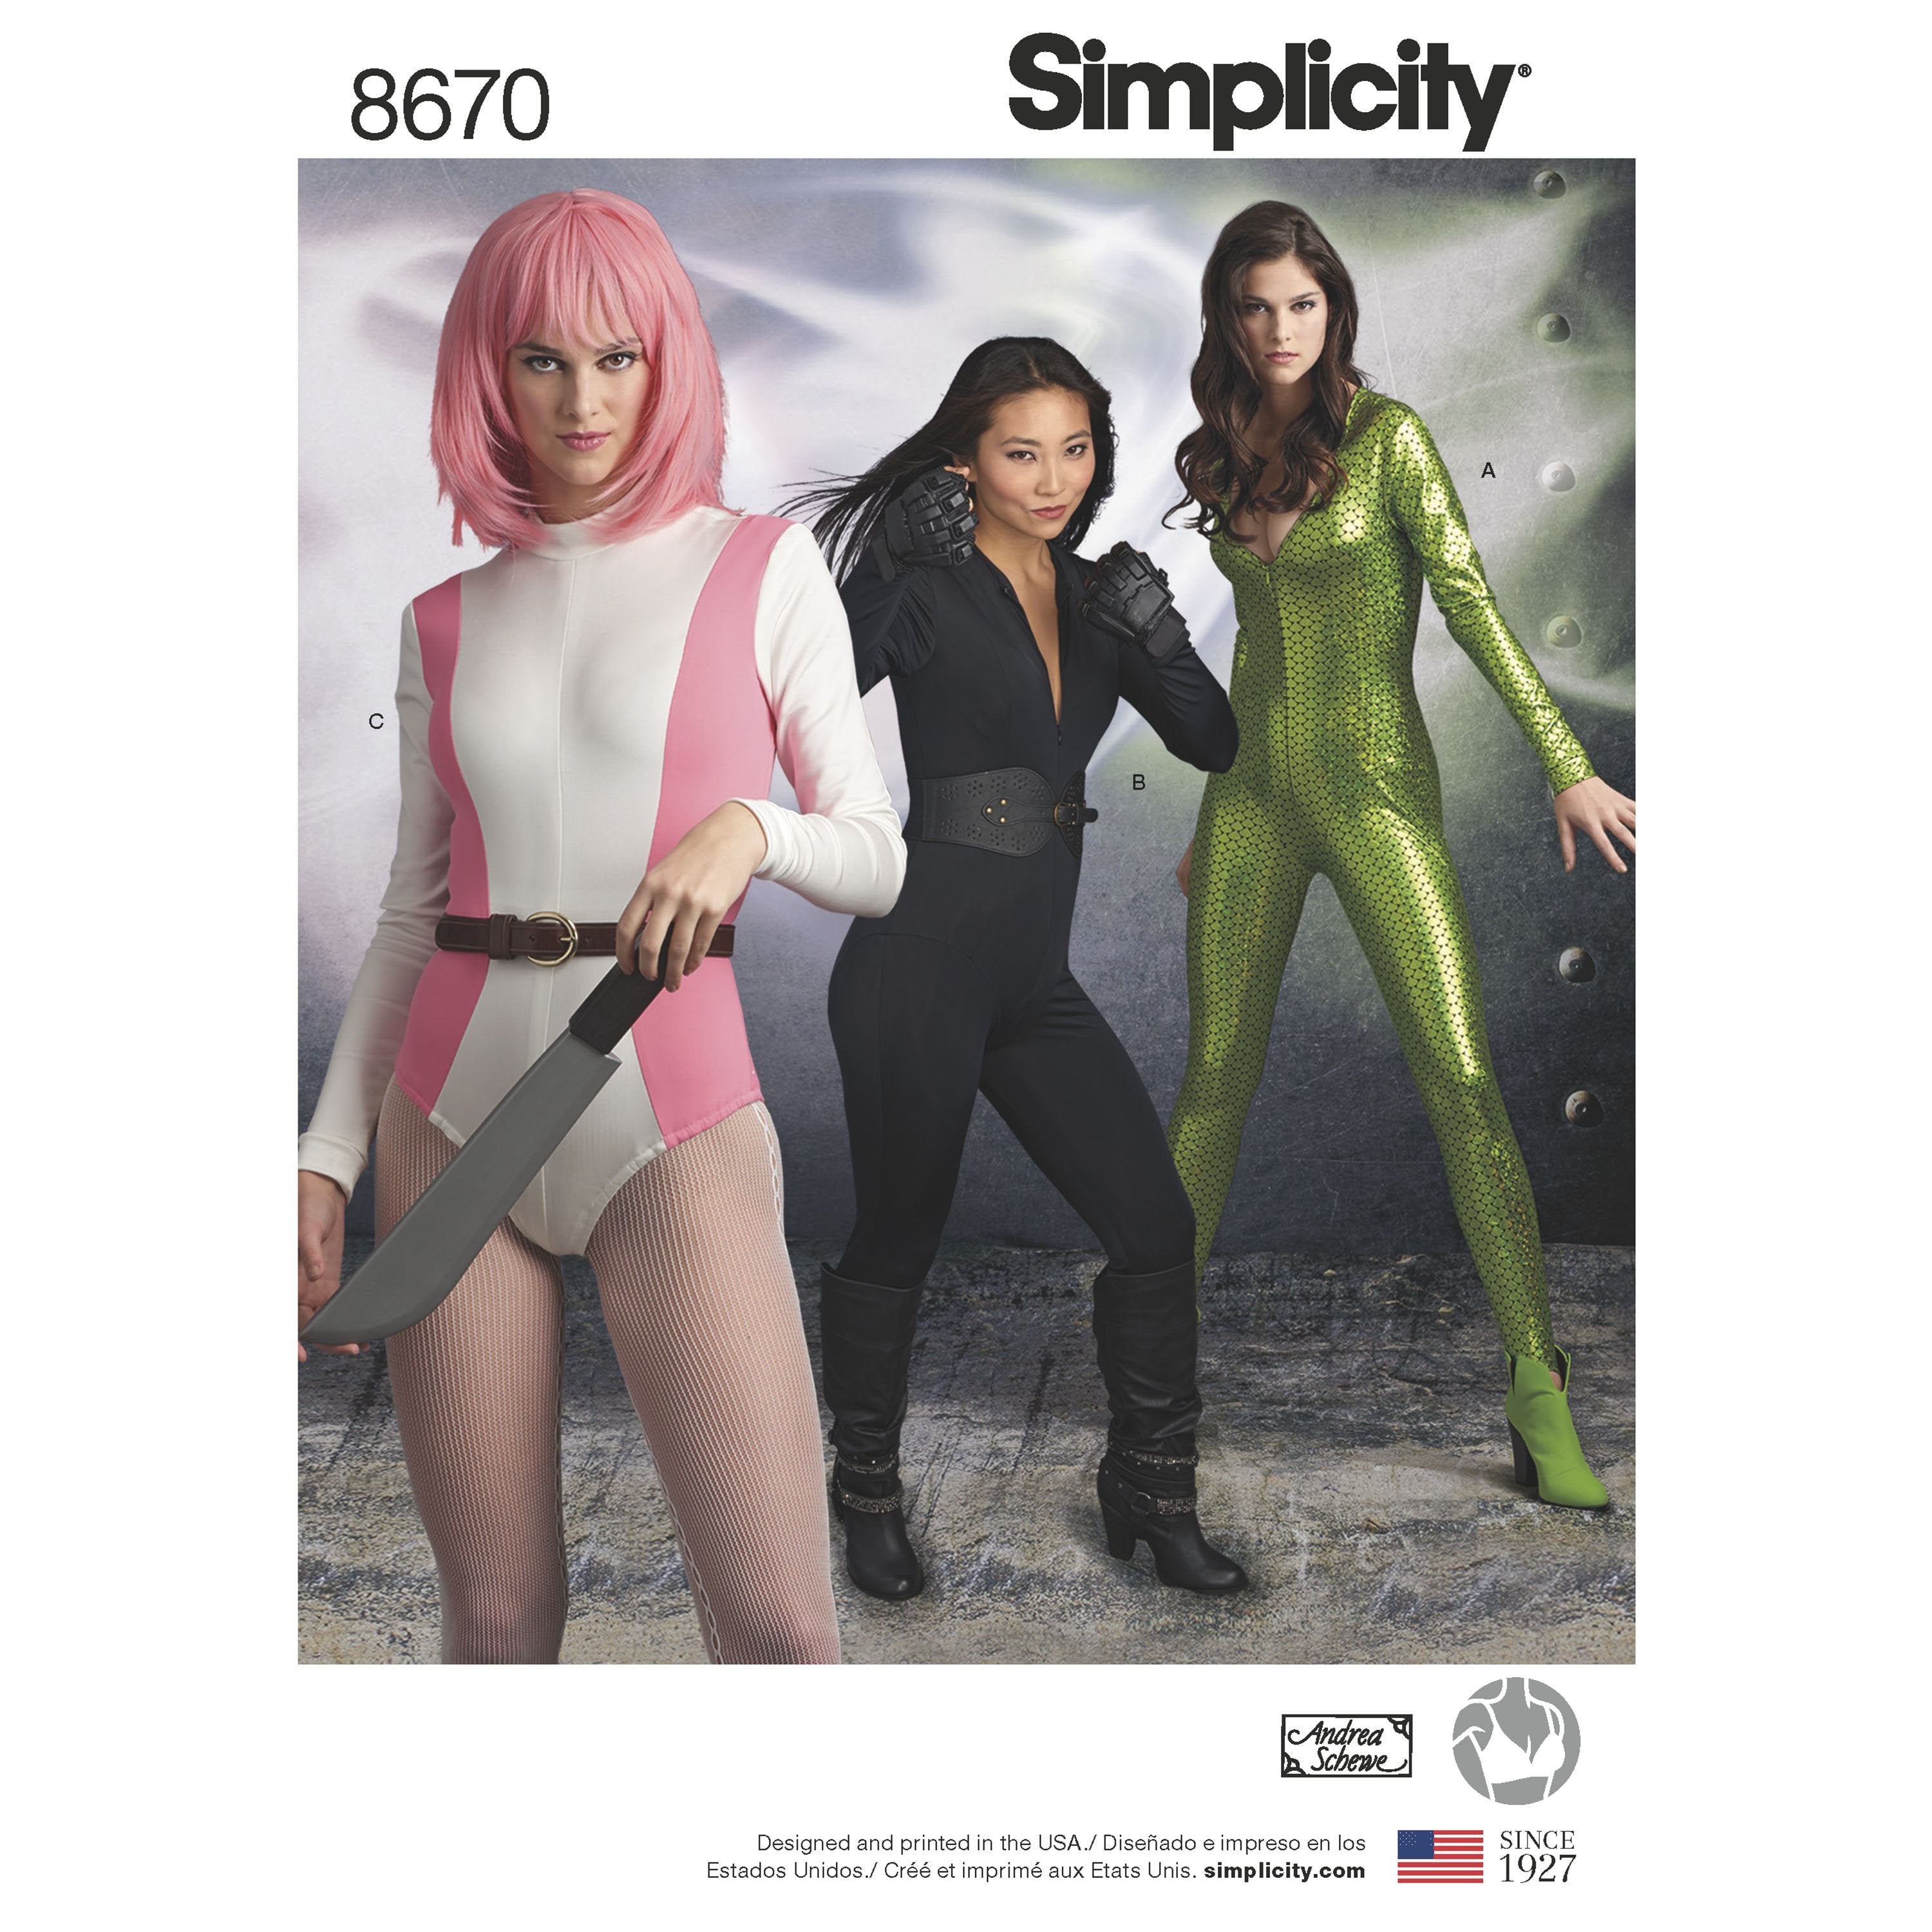 Simplicity Pattern 8670 Cosplay knit jumpsuit and bodysuit costume from Jaycotts Sewing Supplies